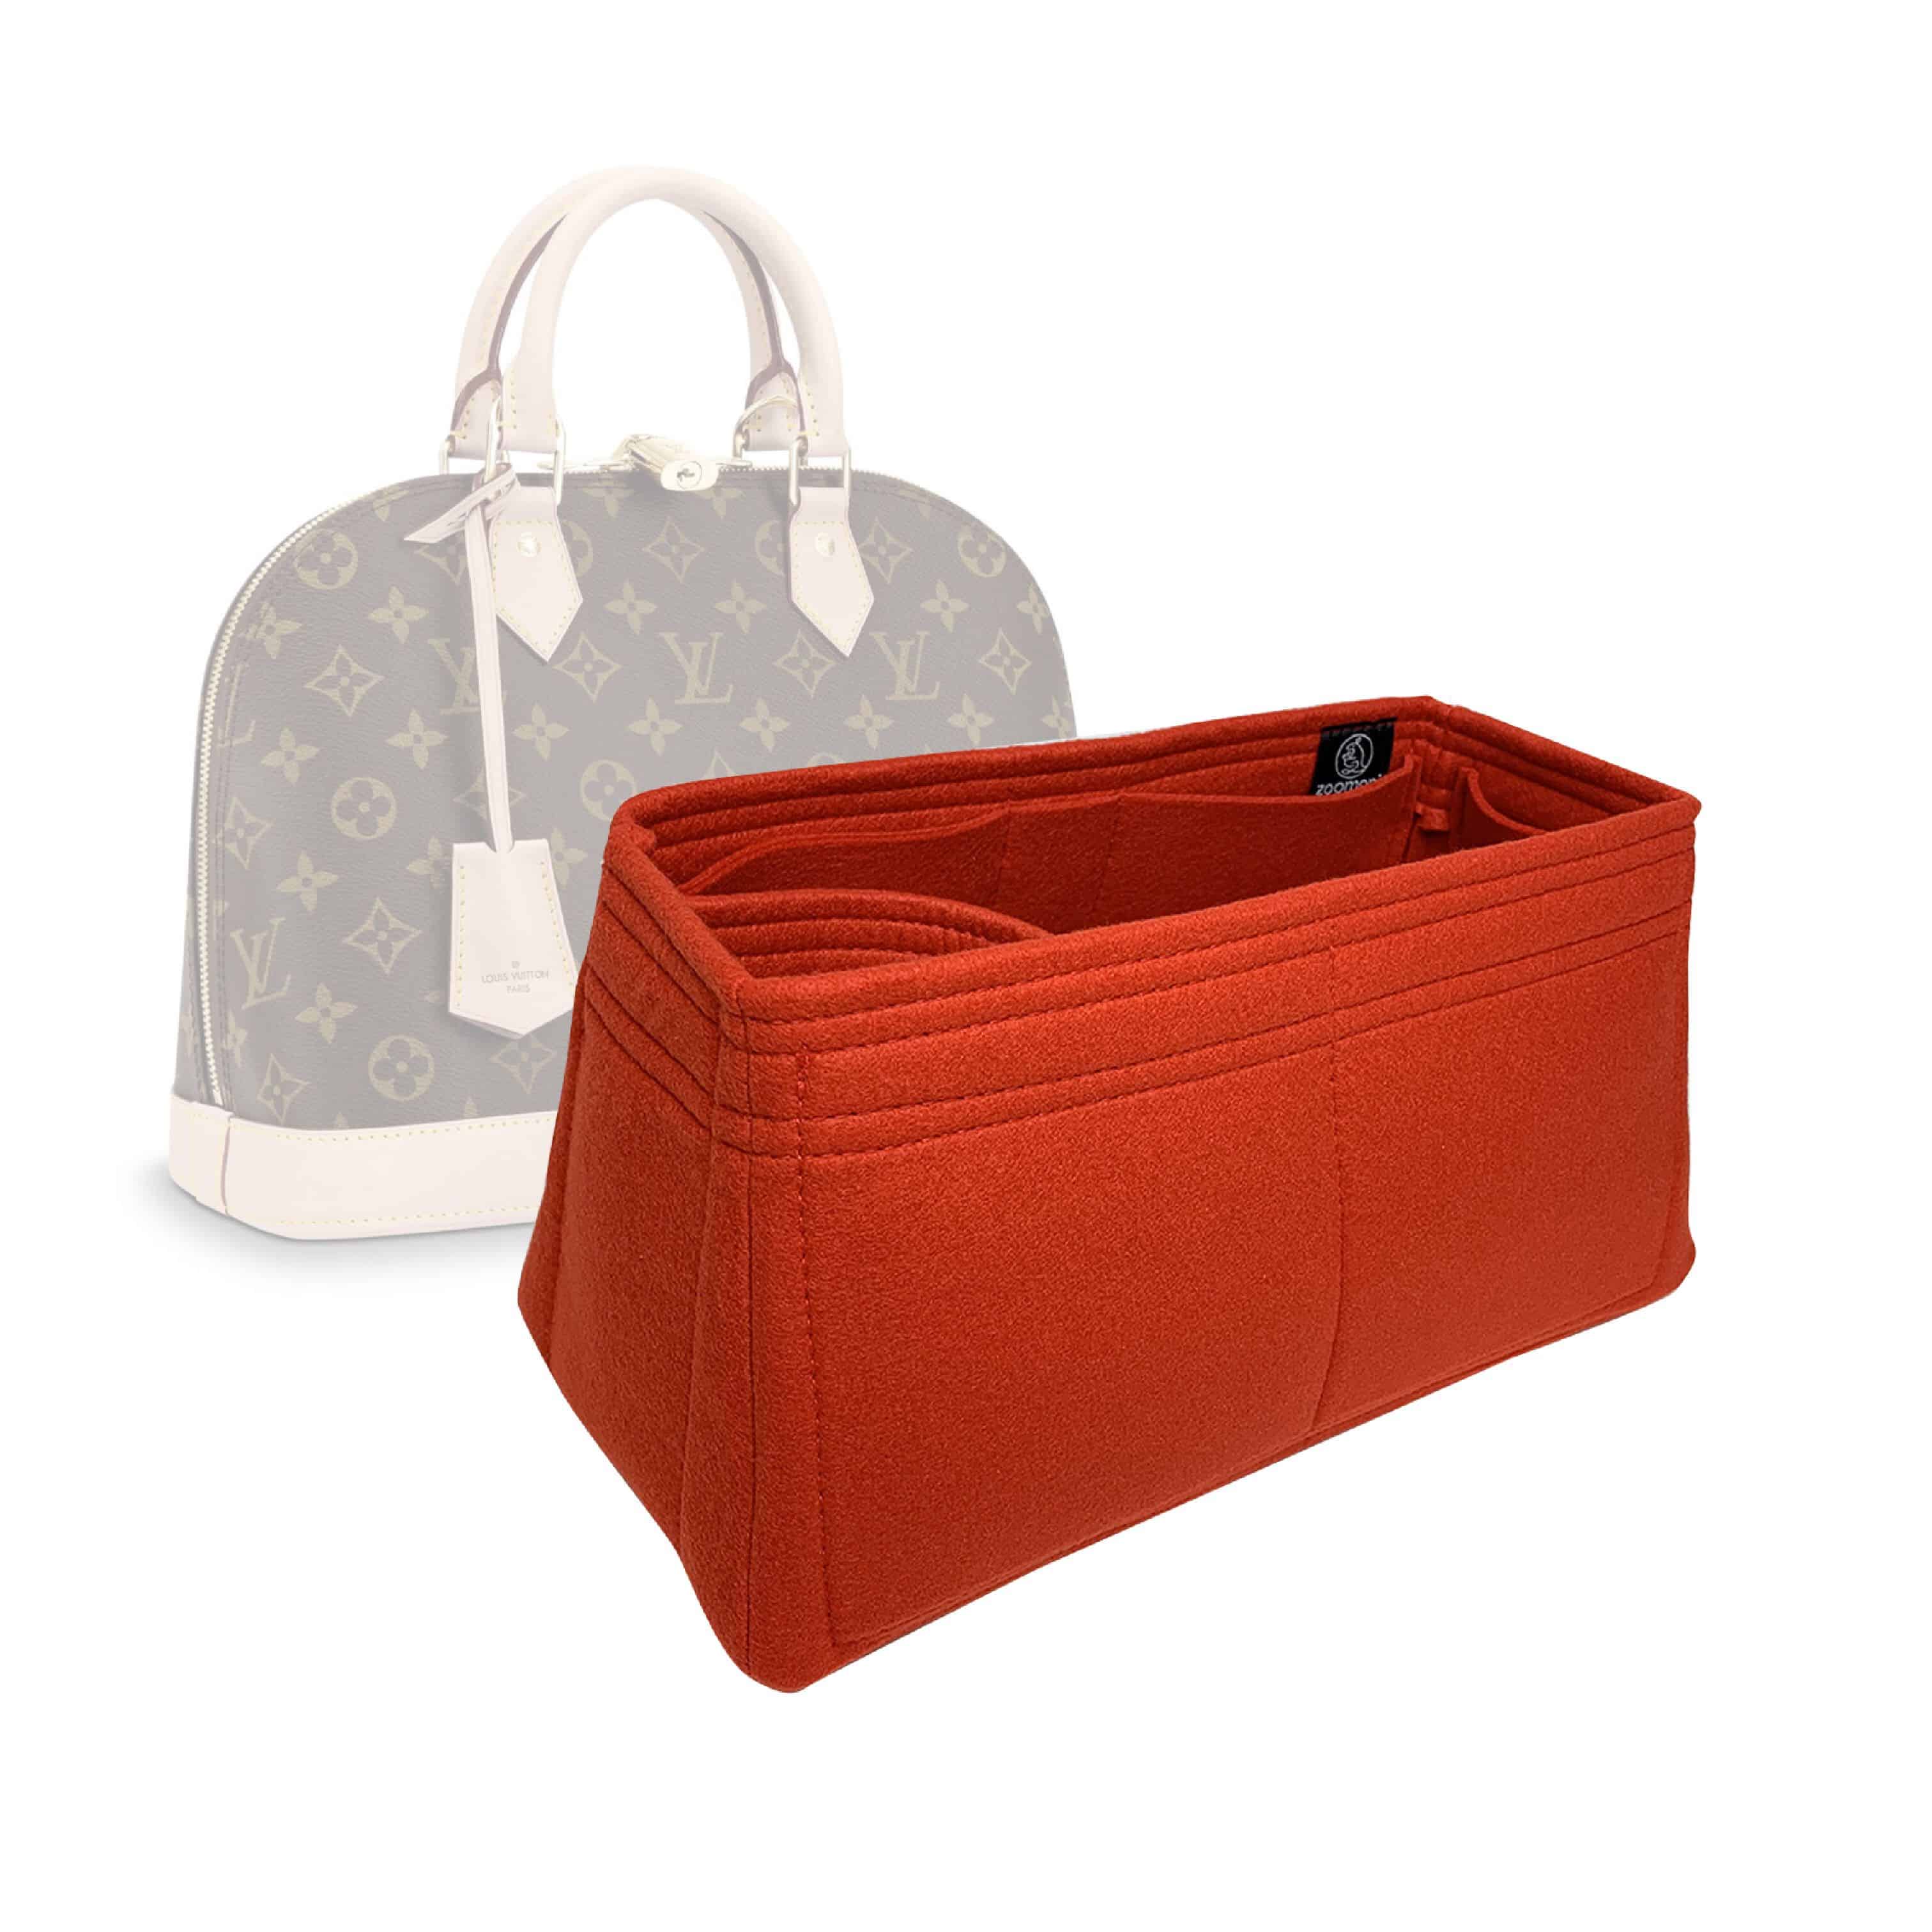 Bag and Purse Organizer with Regular Style for Louis Vuitton Alma Models